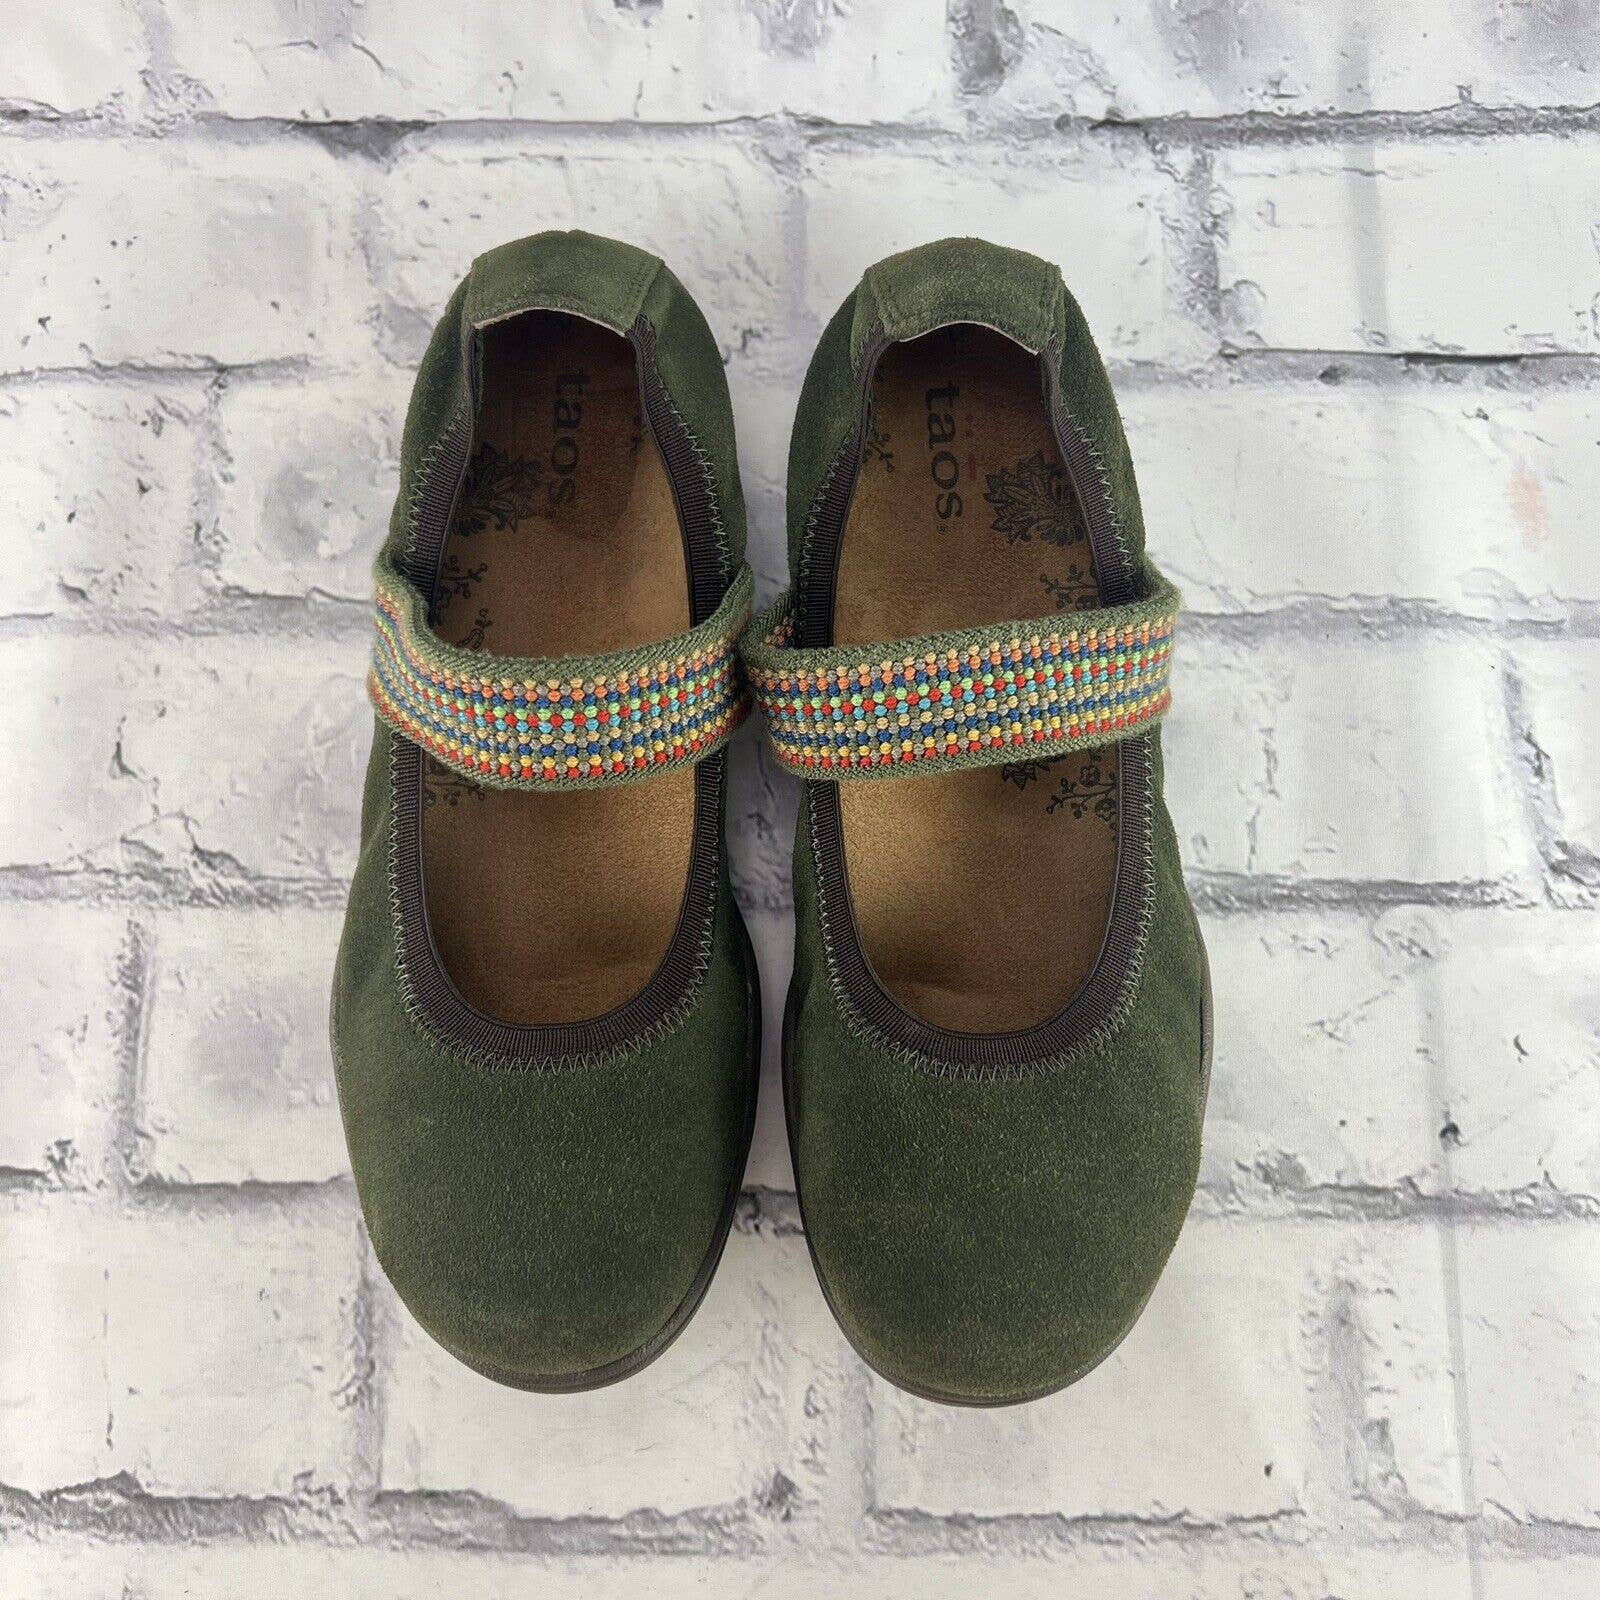 Taos Bandana Mary Jane Shoes Womens 6.5 Slip On Flats Casual Comfort Green Suede